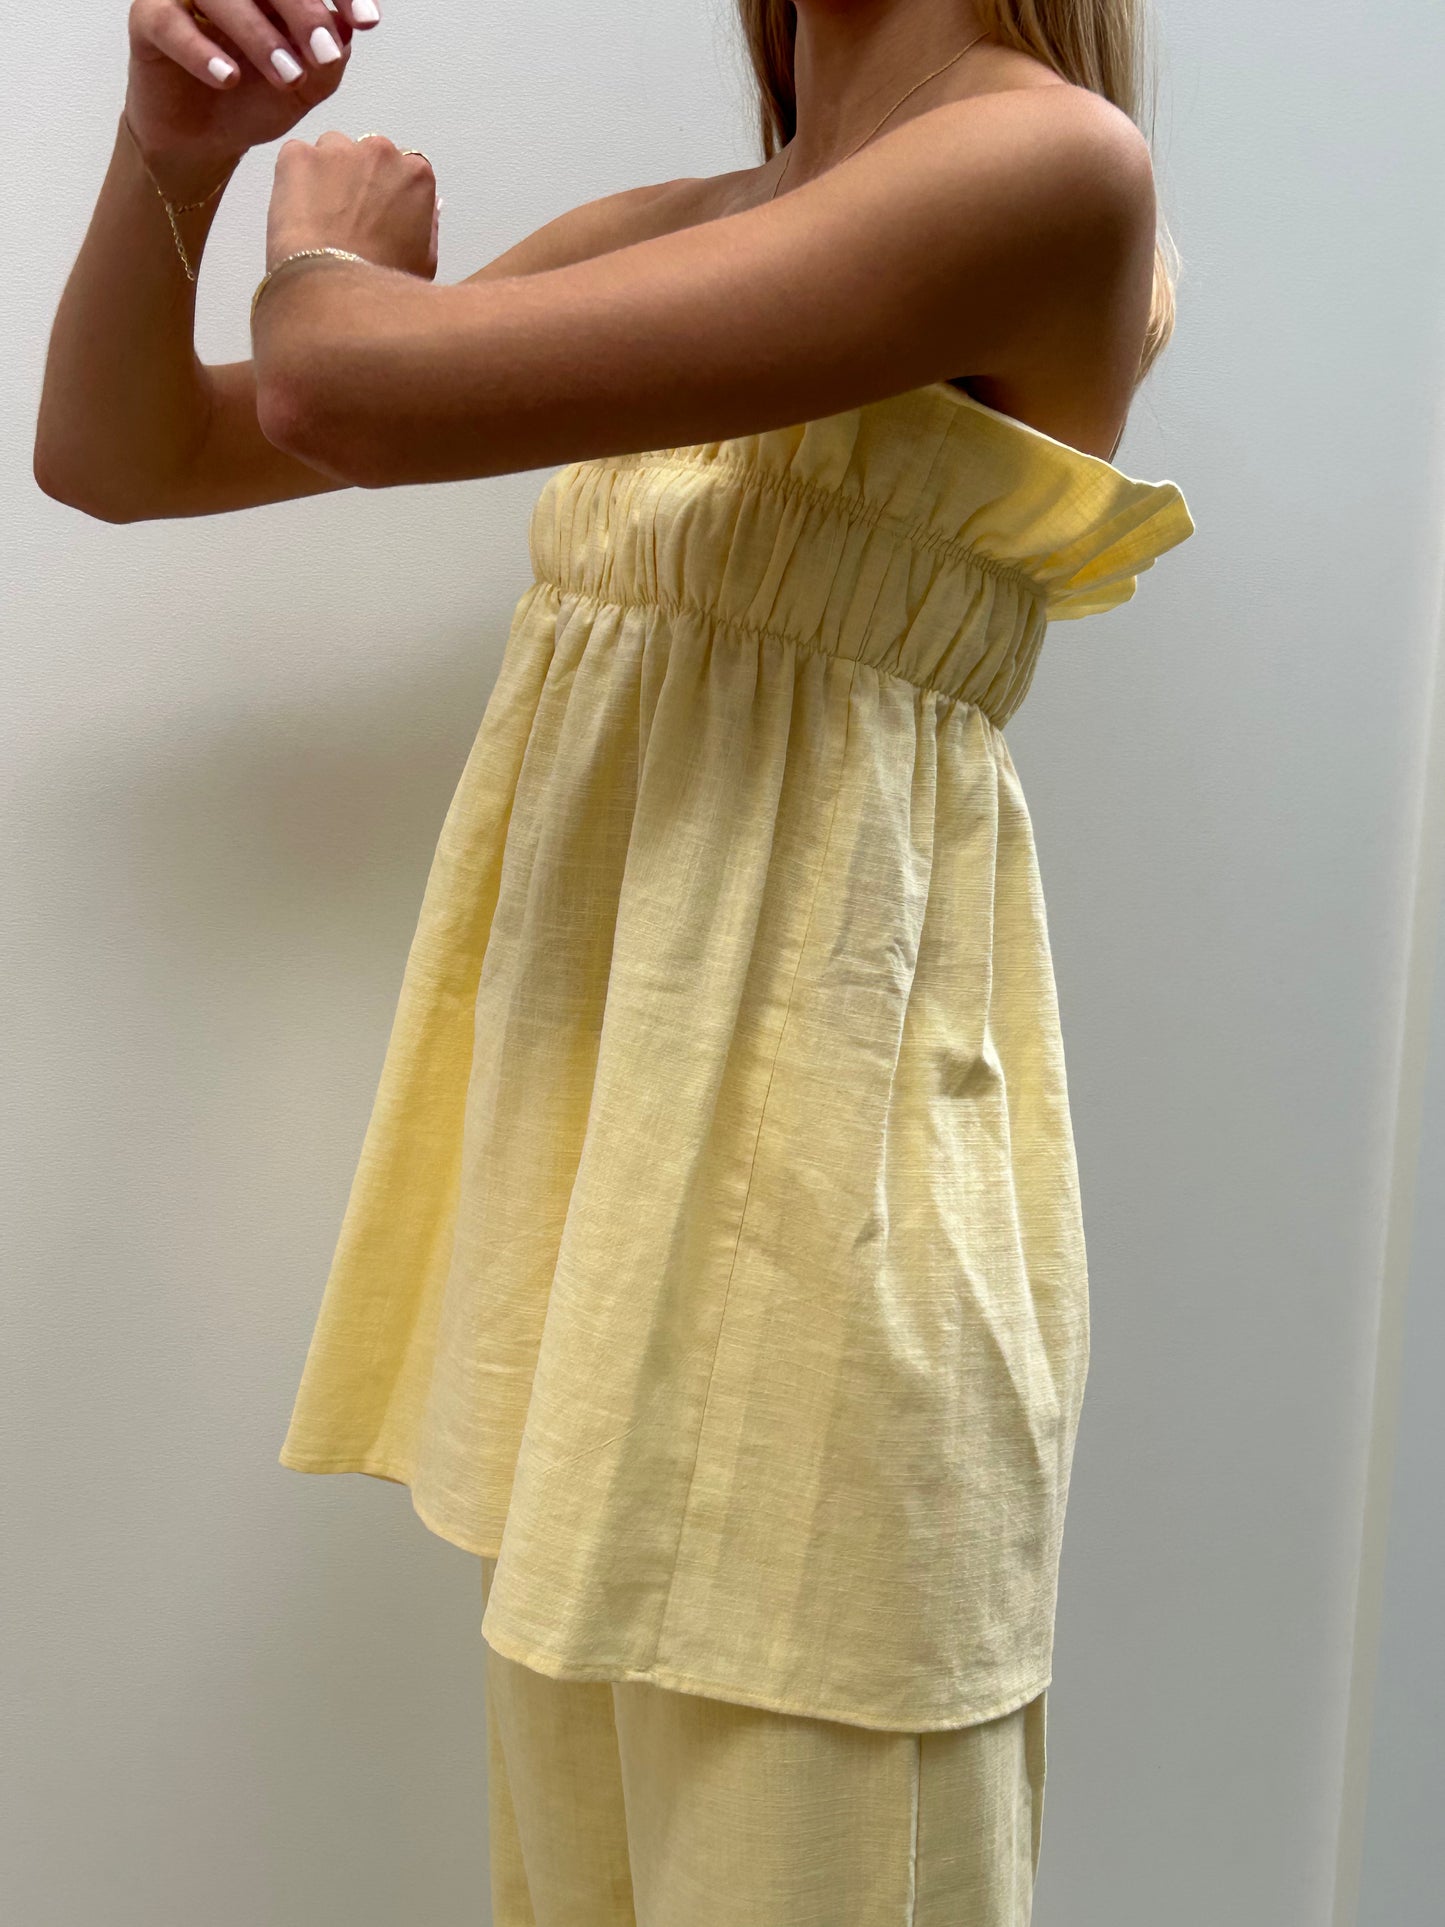 PO - The Greta Top in White or Butter Yellow